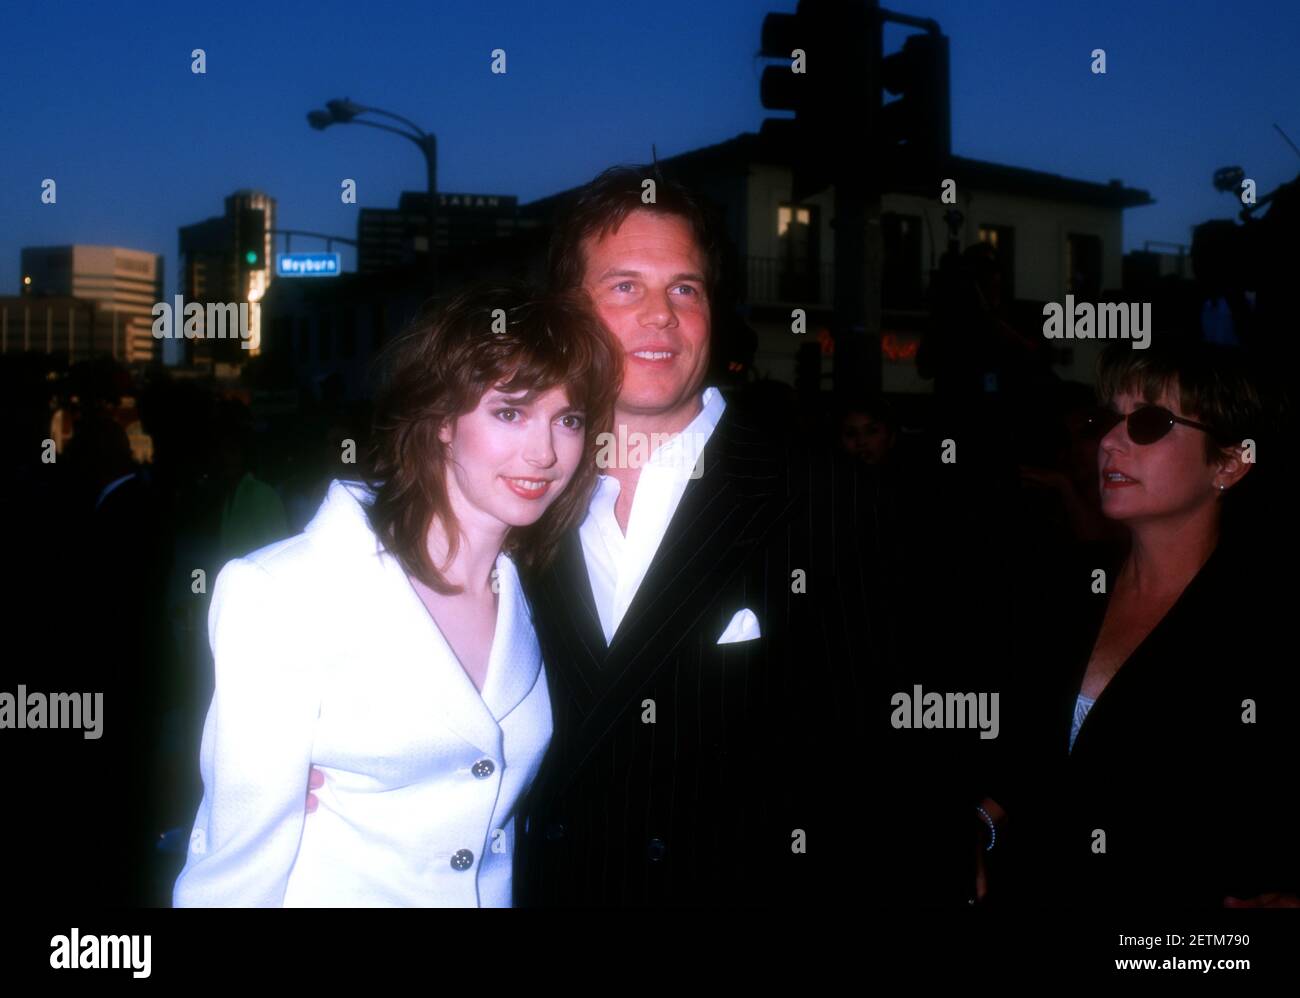 Westwood, California, USA 8th May 1996 Actor Bill Paxton and wife Louise Paxton attend Warner Bros. Pictures 'Twister' Premiere on May 8, 1996 at Mann Village Theatre in Westwood, California, USA. Photo by Barry King/Alamy Stock Photo Stock Photo